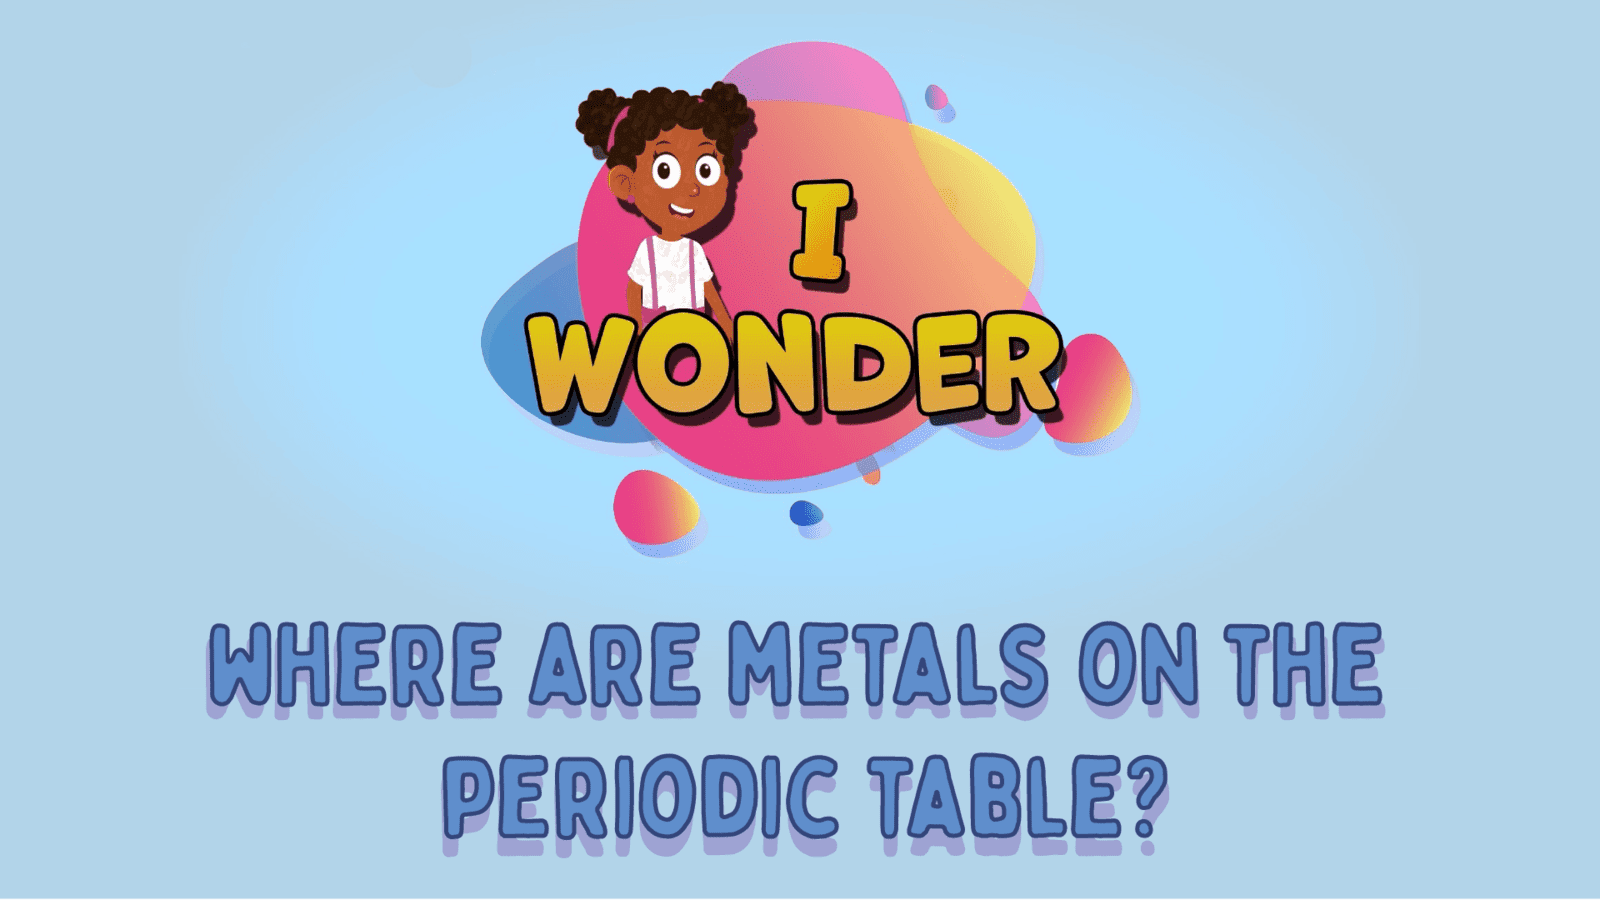 Where Are Metals On The Periodic Table?